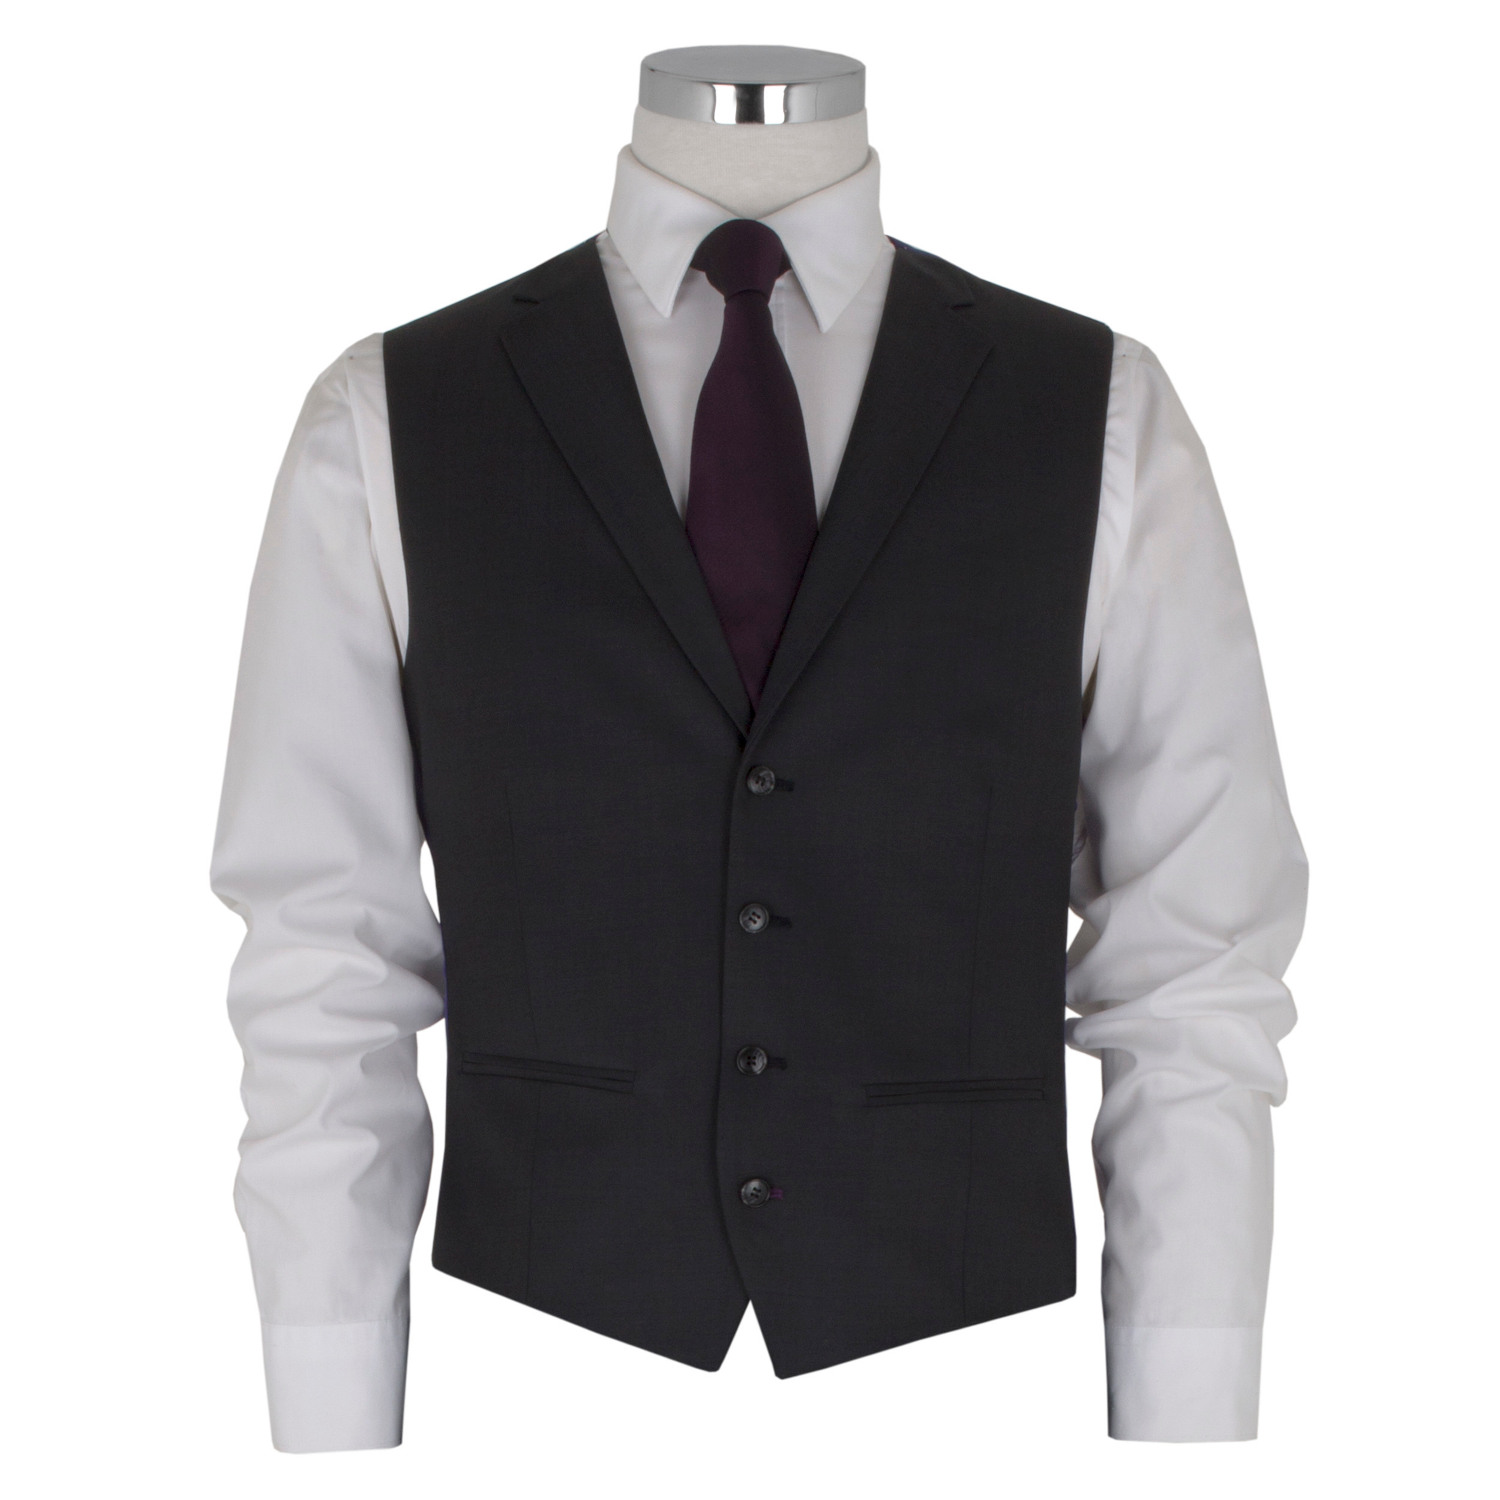 Charcoal Wool 3 Piece Suit - Tom Murphy's Formal and Menswear